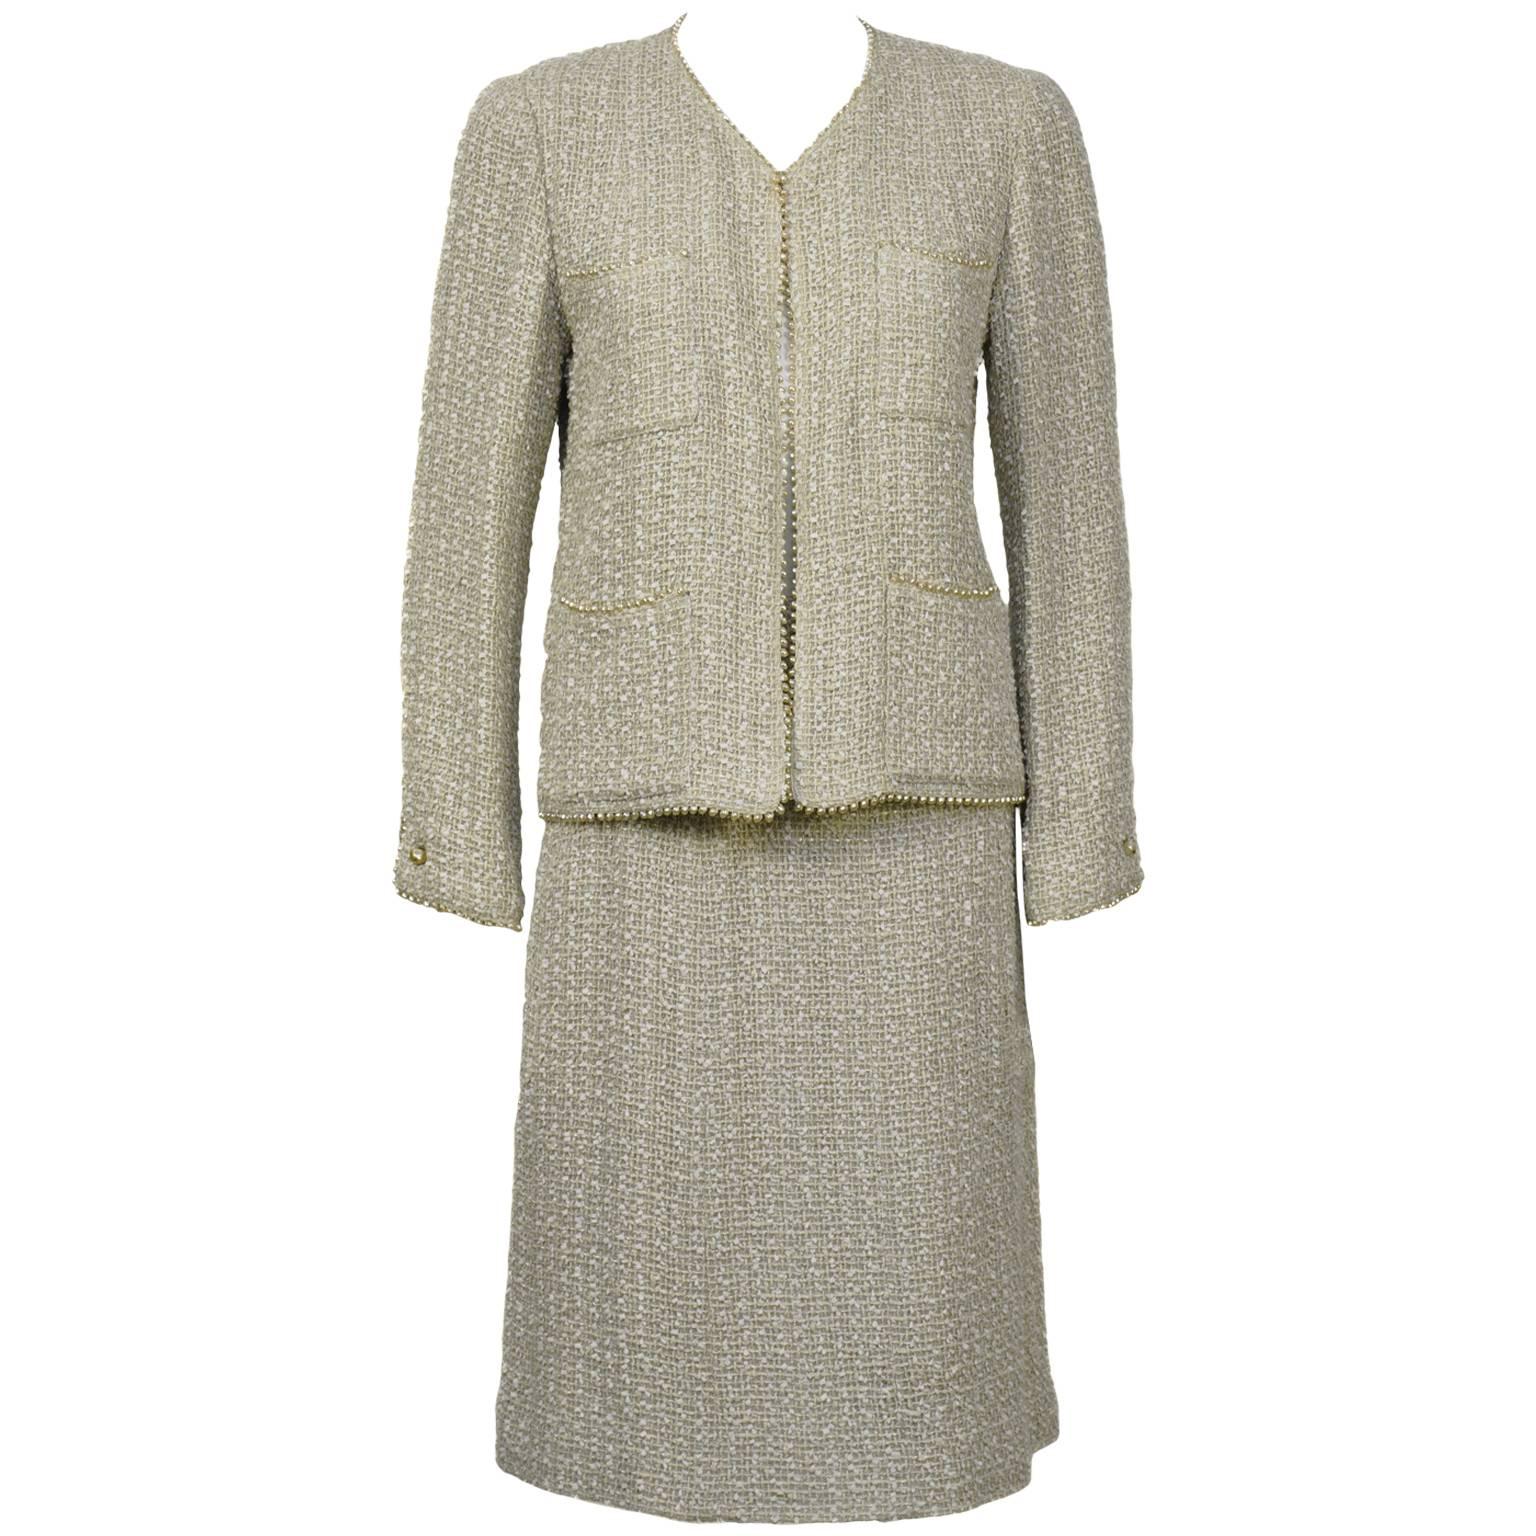 Spring 1999 Chanel Pearl Trim Boucle Skirt Suit For Sale